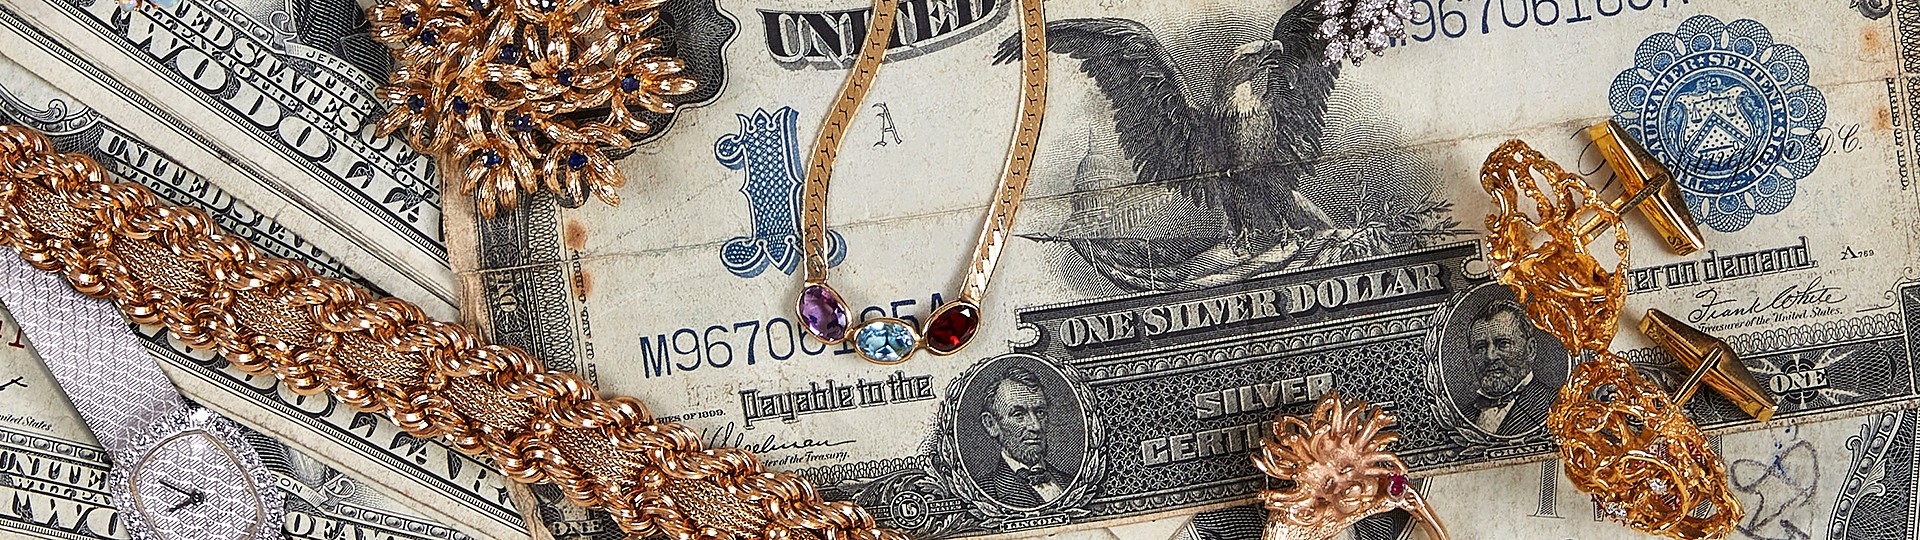 Online Only Coins & Jewelry by Pook & Pook Inc